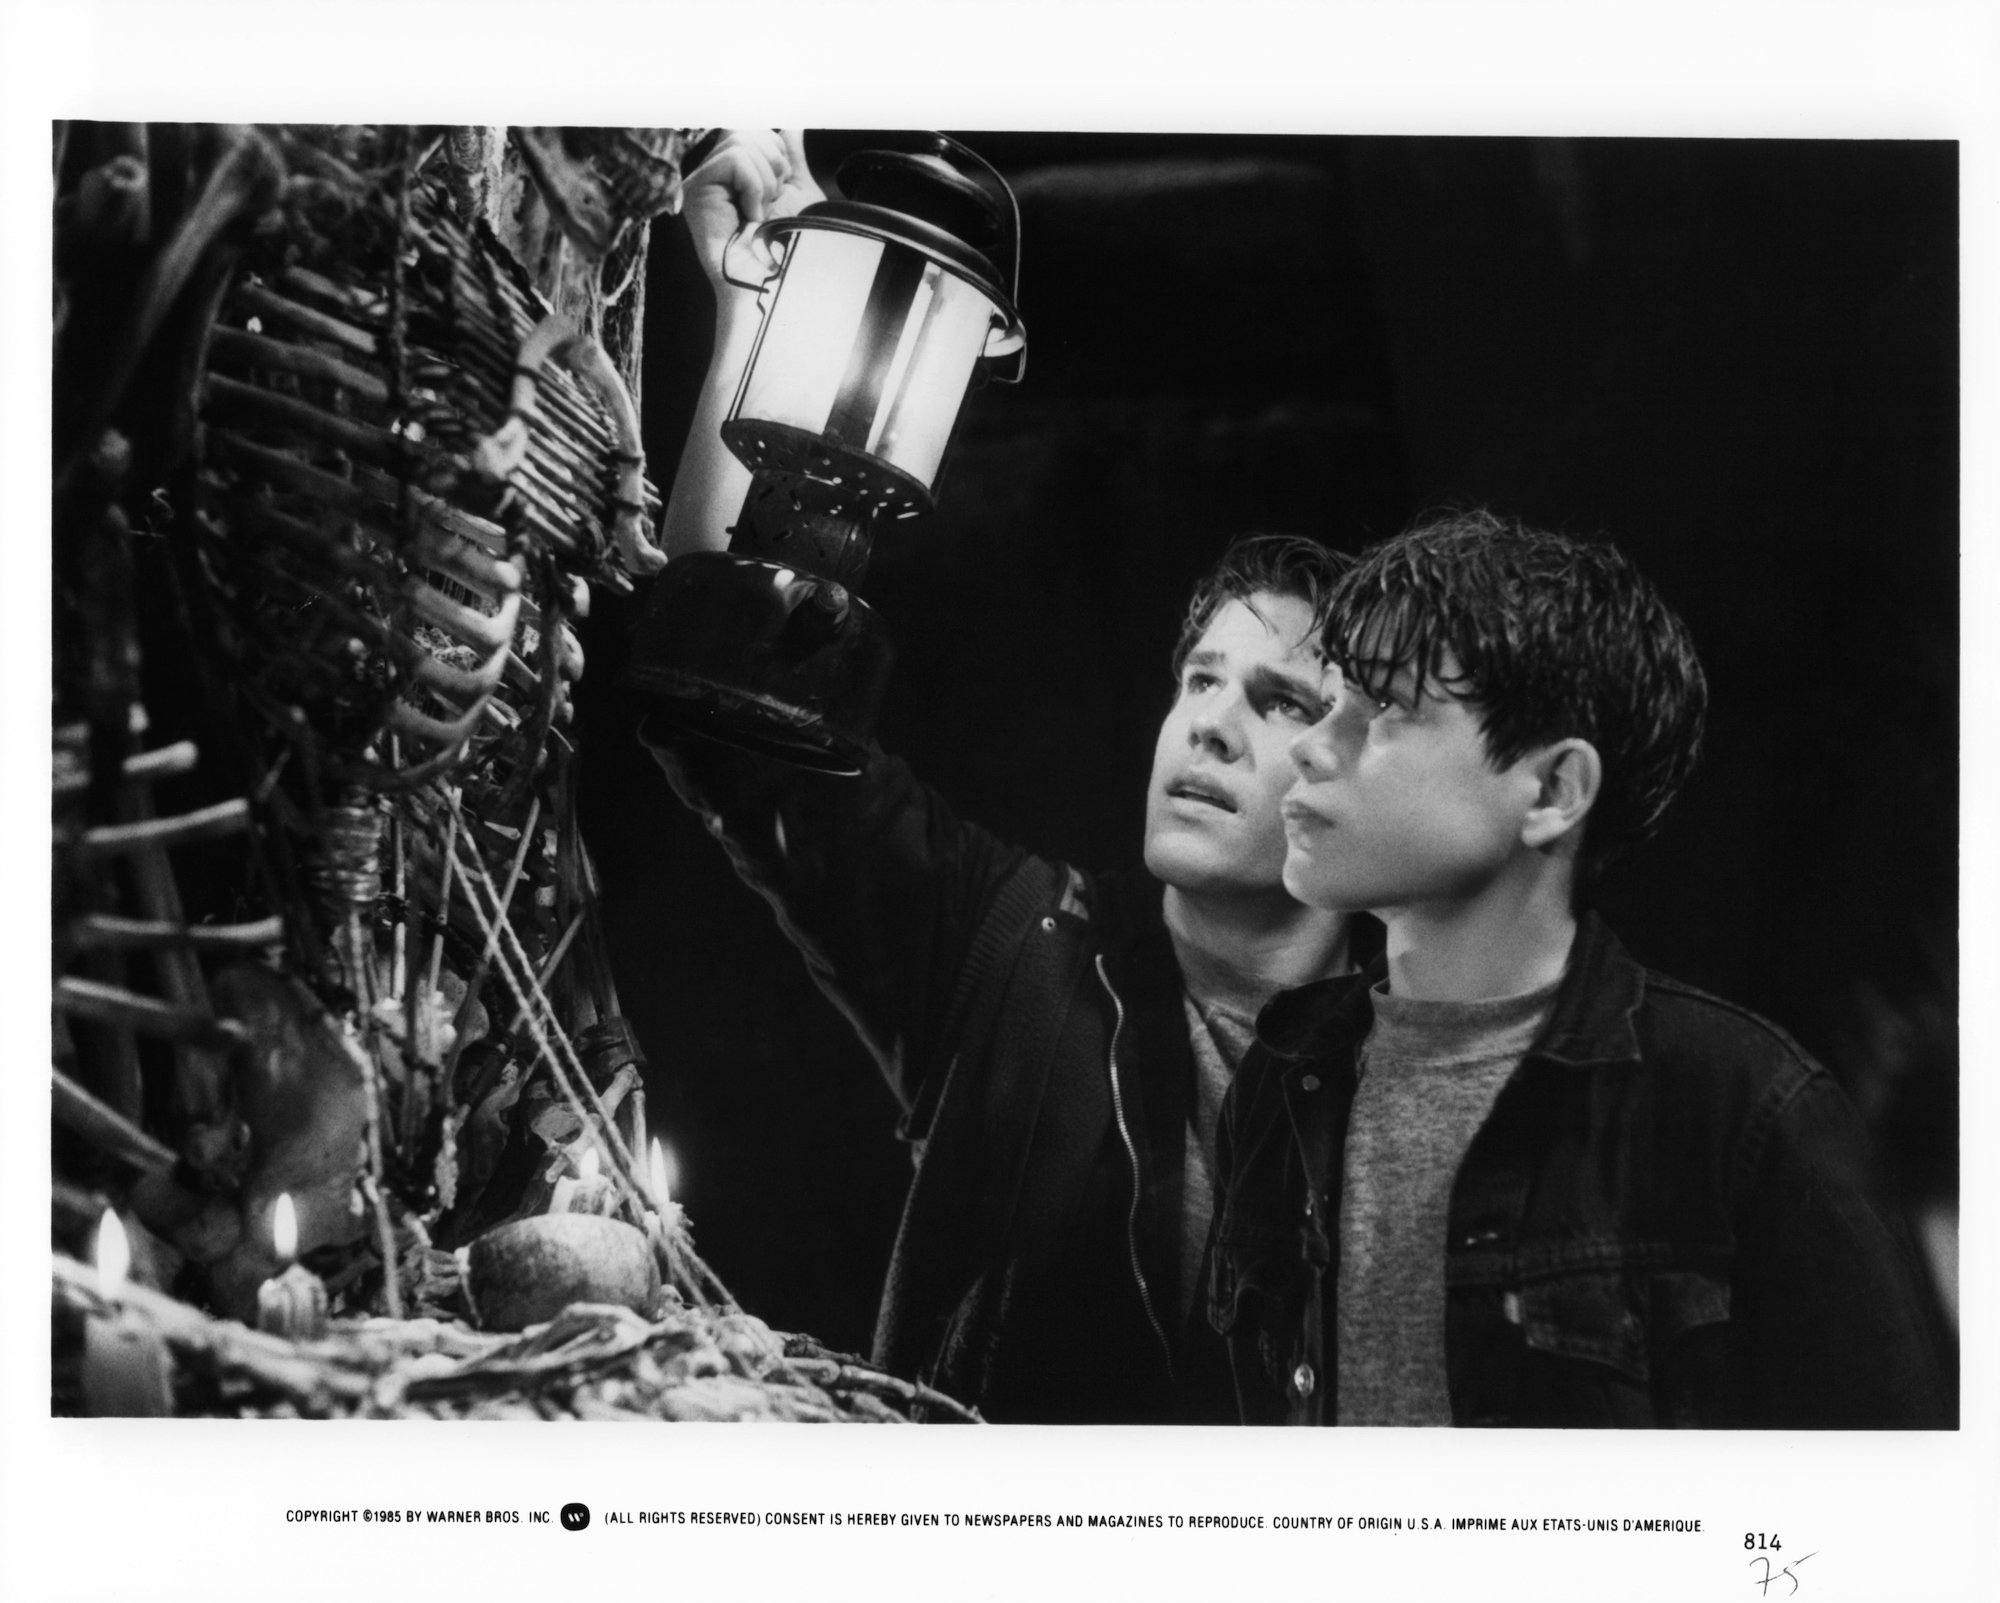 Josh Brolin and Sean Astin hold up a light to bones in a scene from the 1985 film 'The Goonies.'